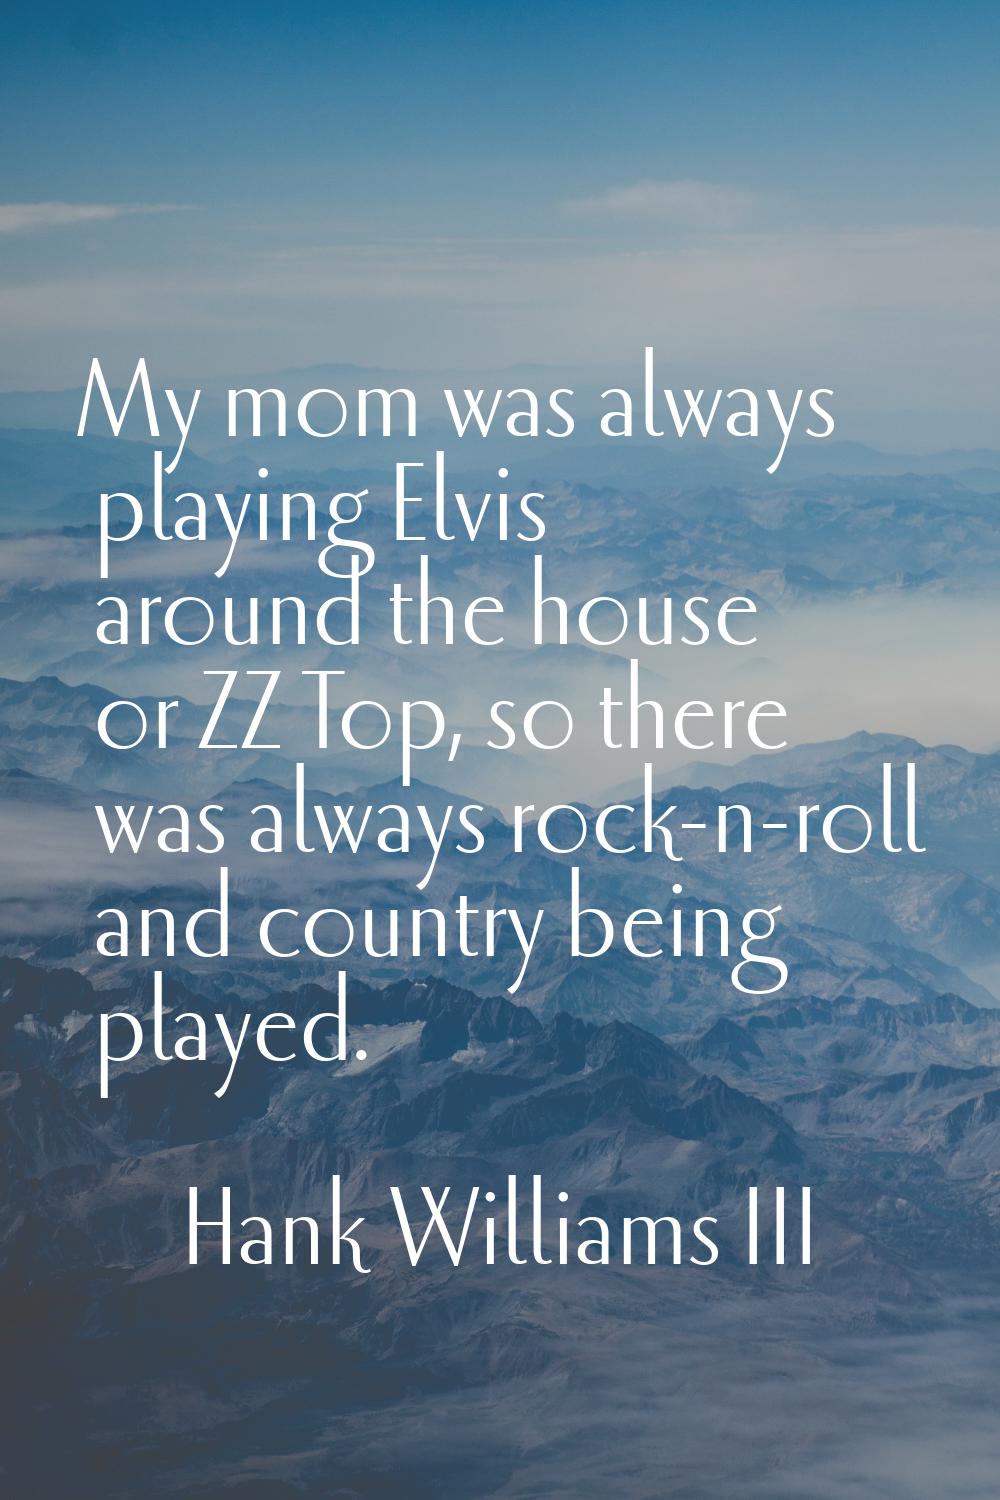 My mom was always playing Elvis around the house or ZZ Top, so there was always rock-n-roll and cou